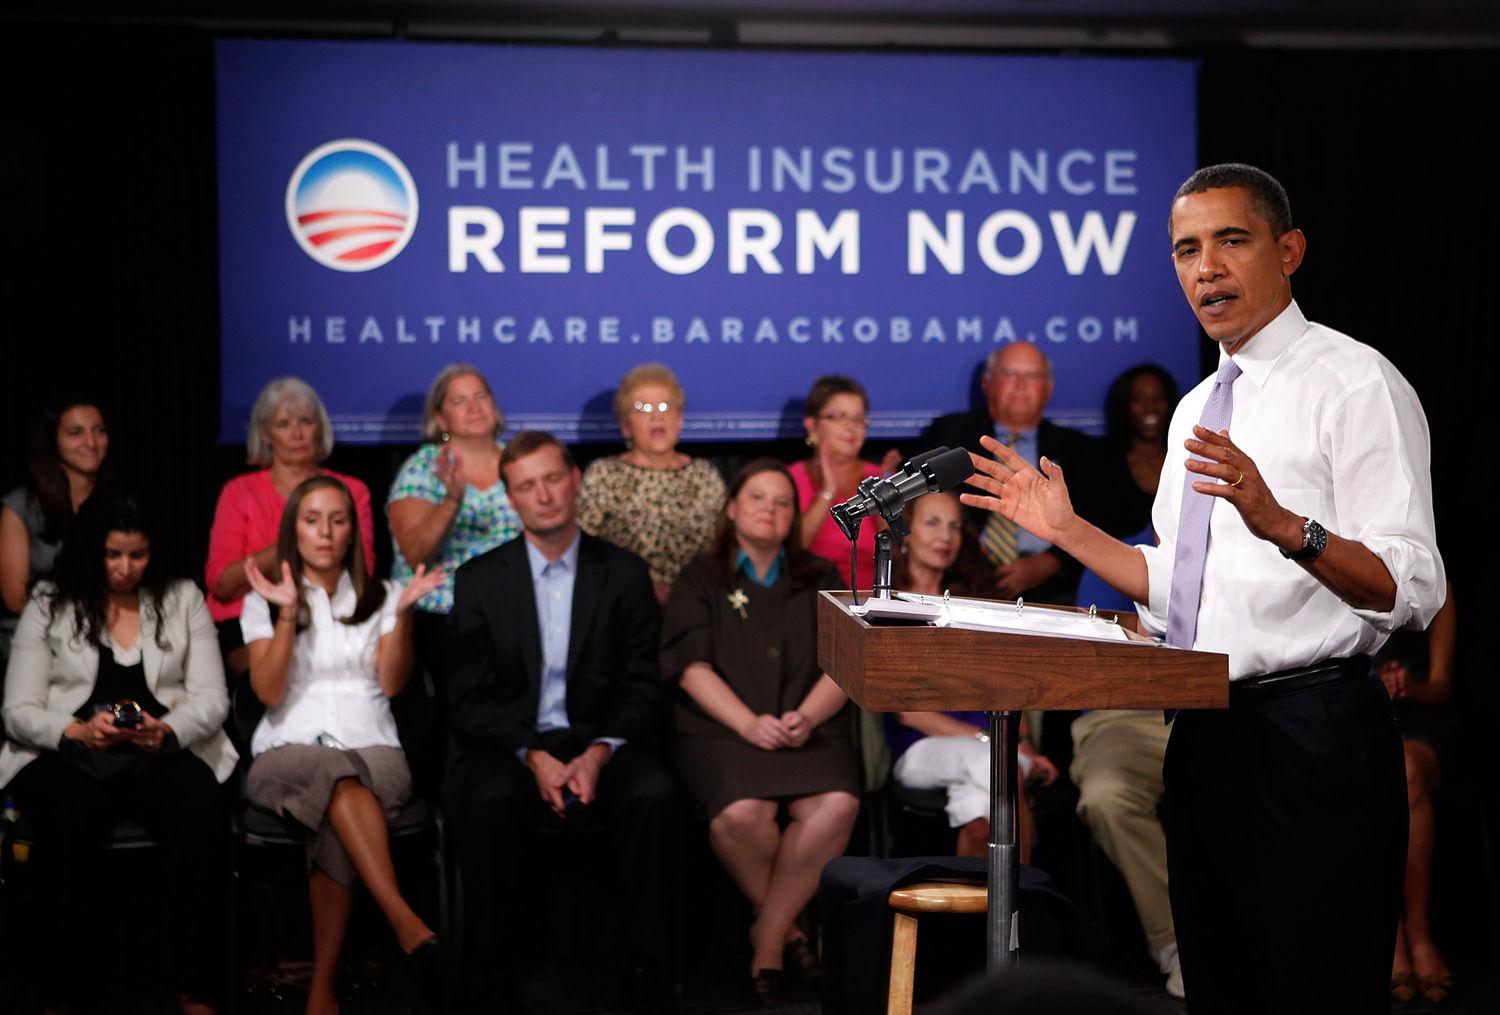 The History of Obamacare - How president Obama reformed the health system in the USA